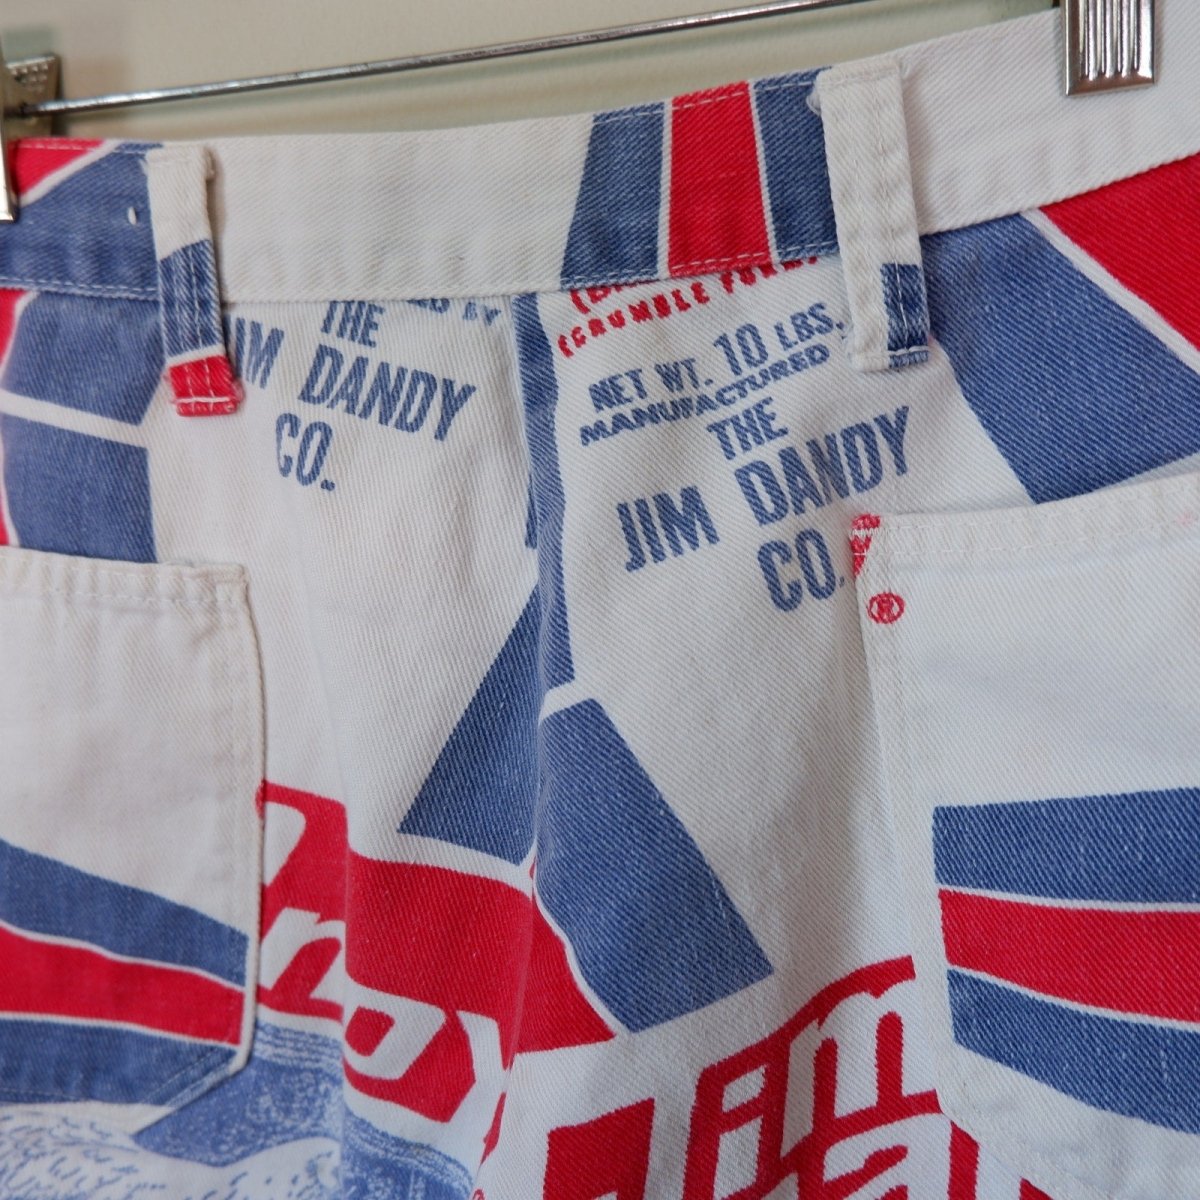 Vintage 70s Jim Dandy Novelty Print Shorts Size Waist 32" Inseam 12" - themallvintage The Mall Vintage 1970s Menswear New Arrival